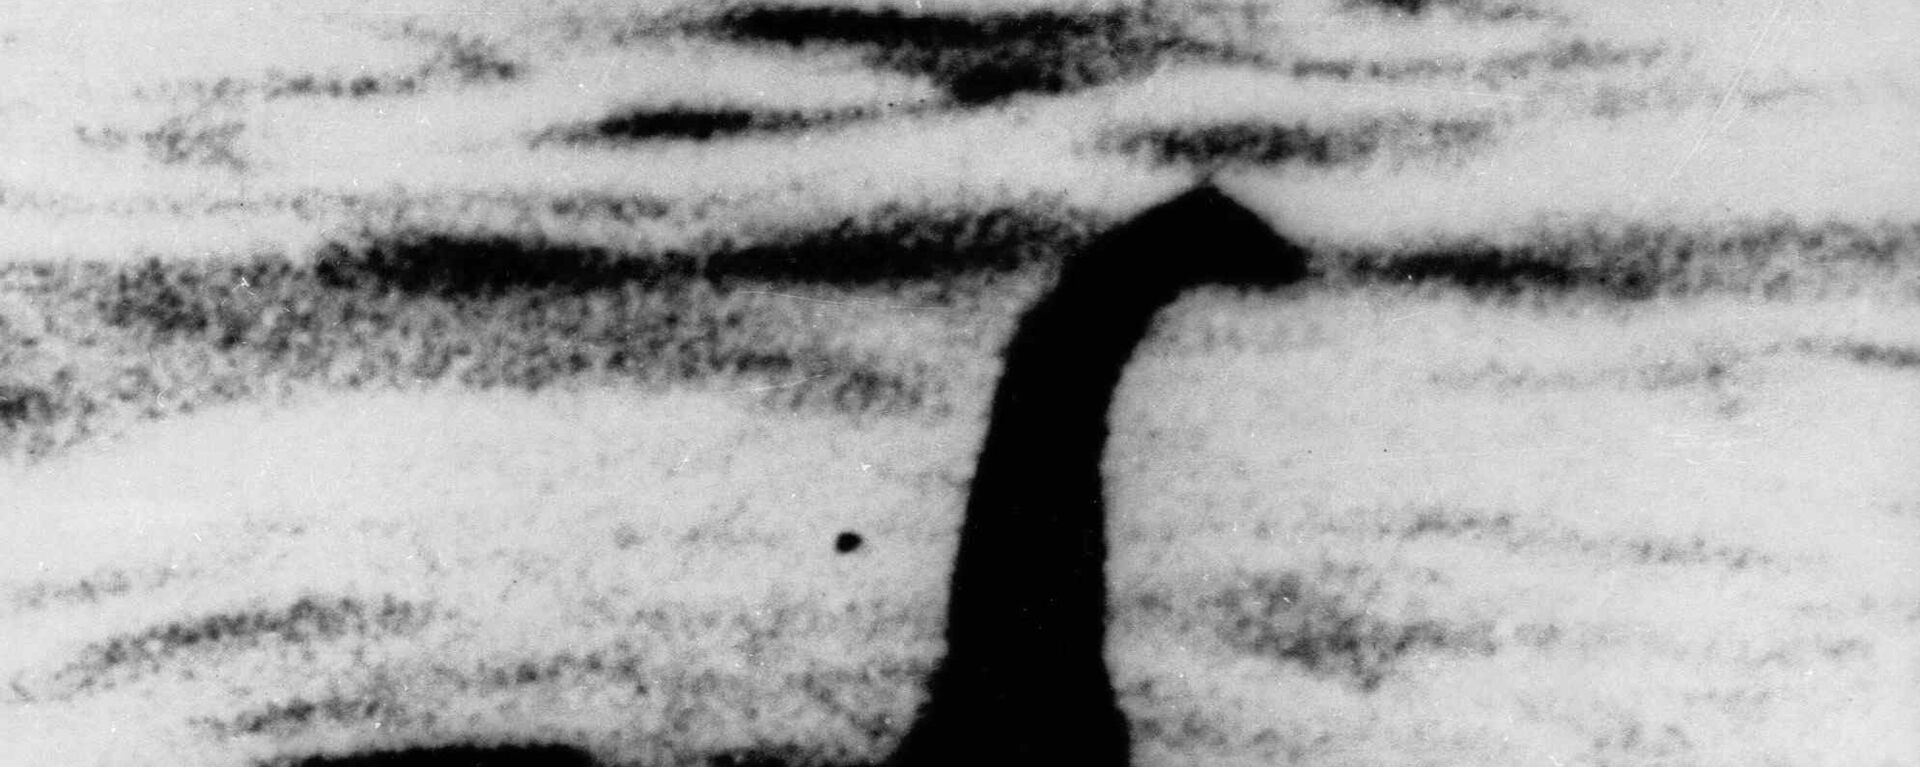 Shadowy shape that some people say is a photo of the Loch Ness monster in Scotland. (File) - Sputnik International, 1920, 09.01.2023